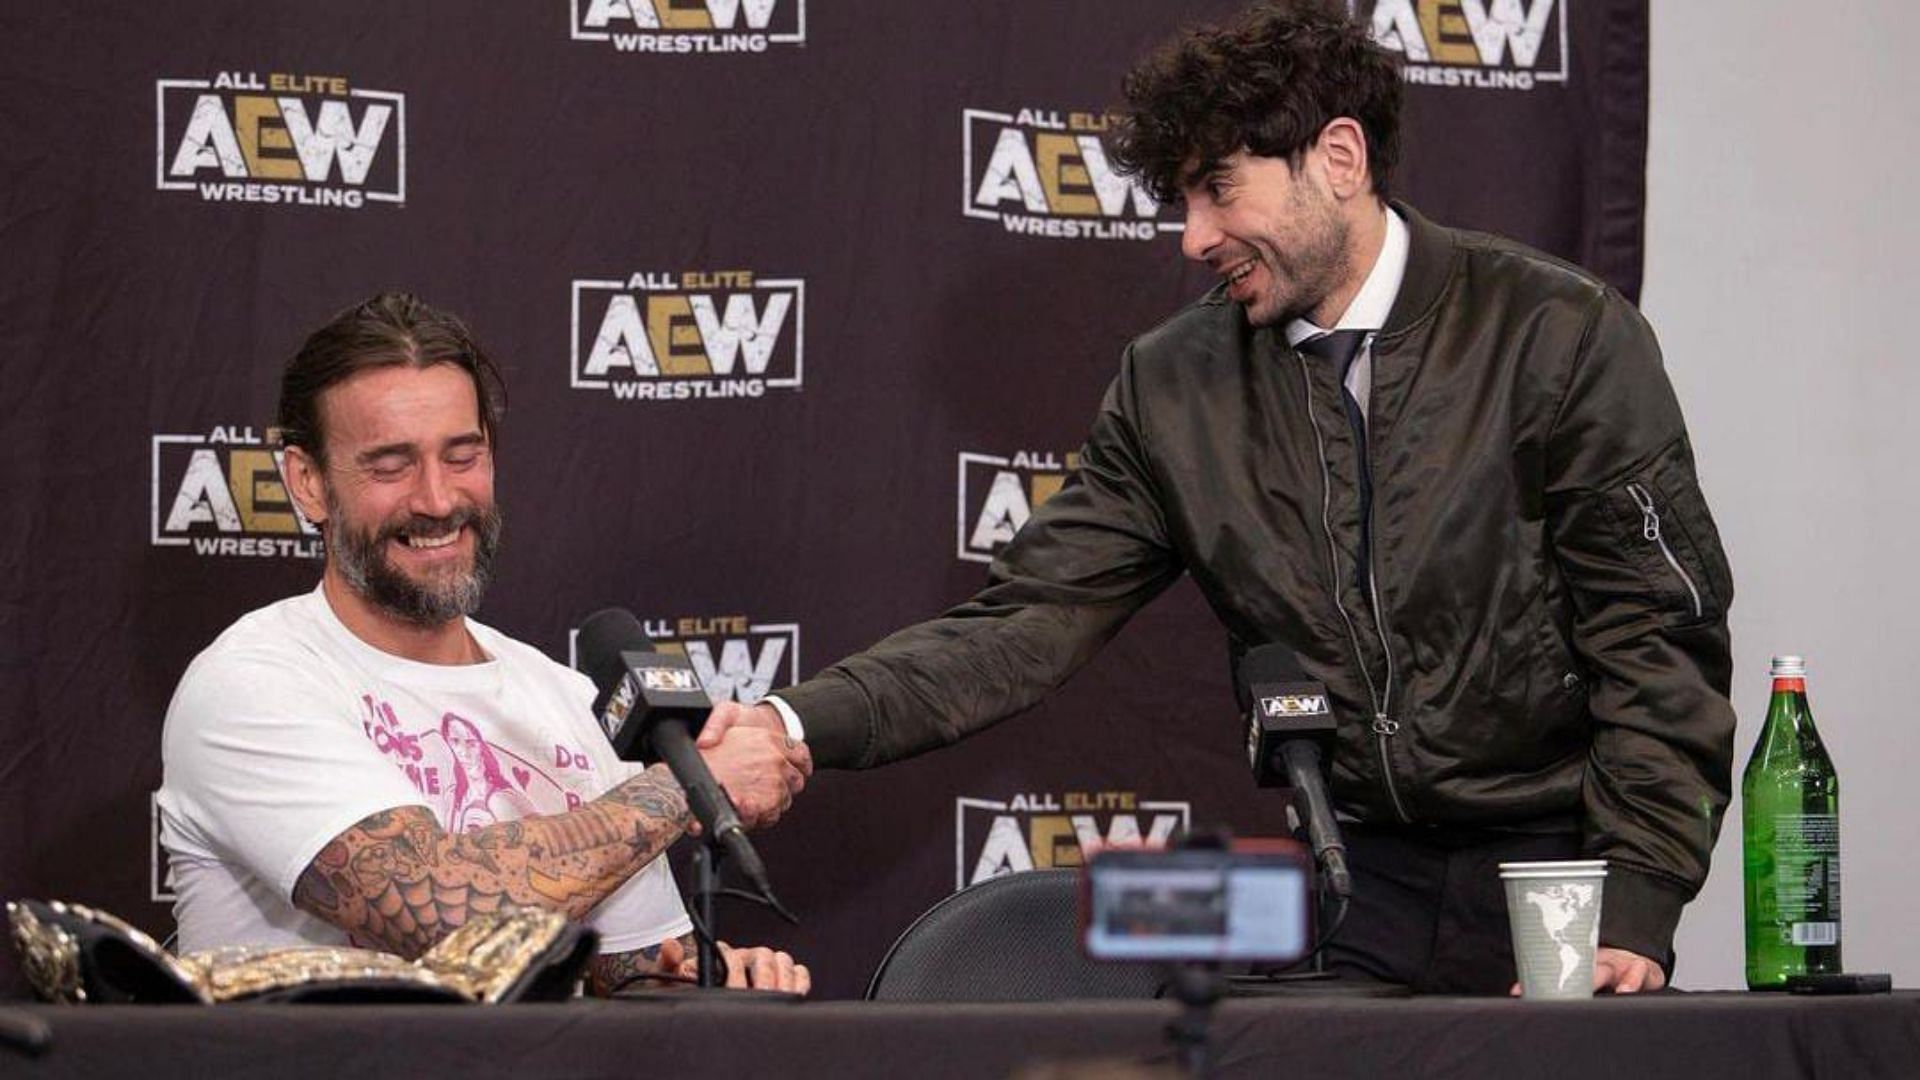 Tony Khan and CM Punk are part of AEW